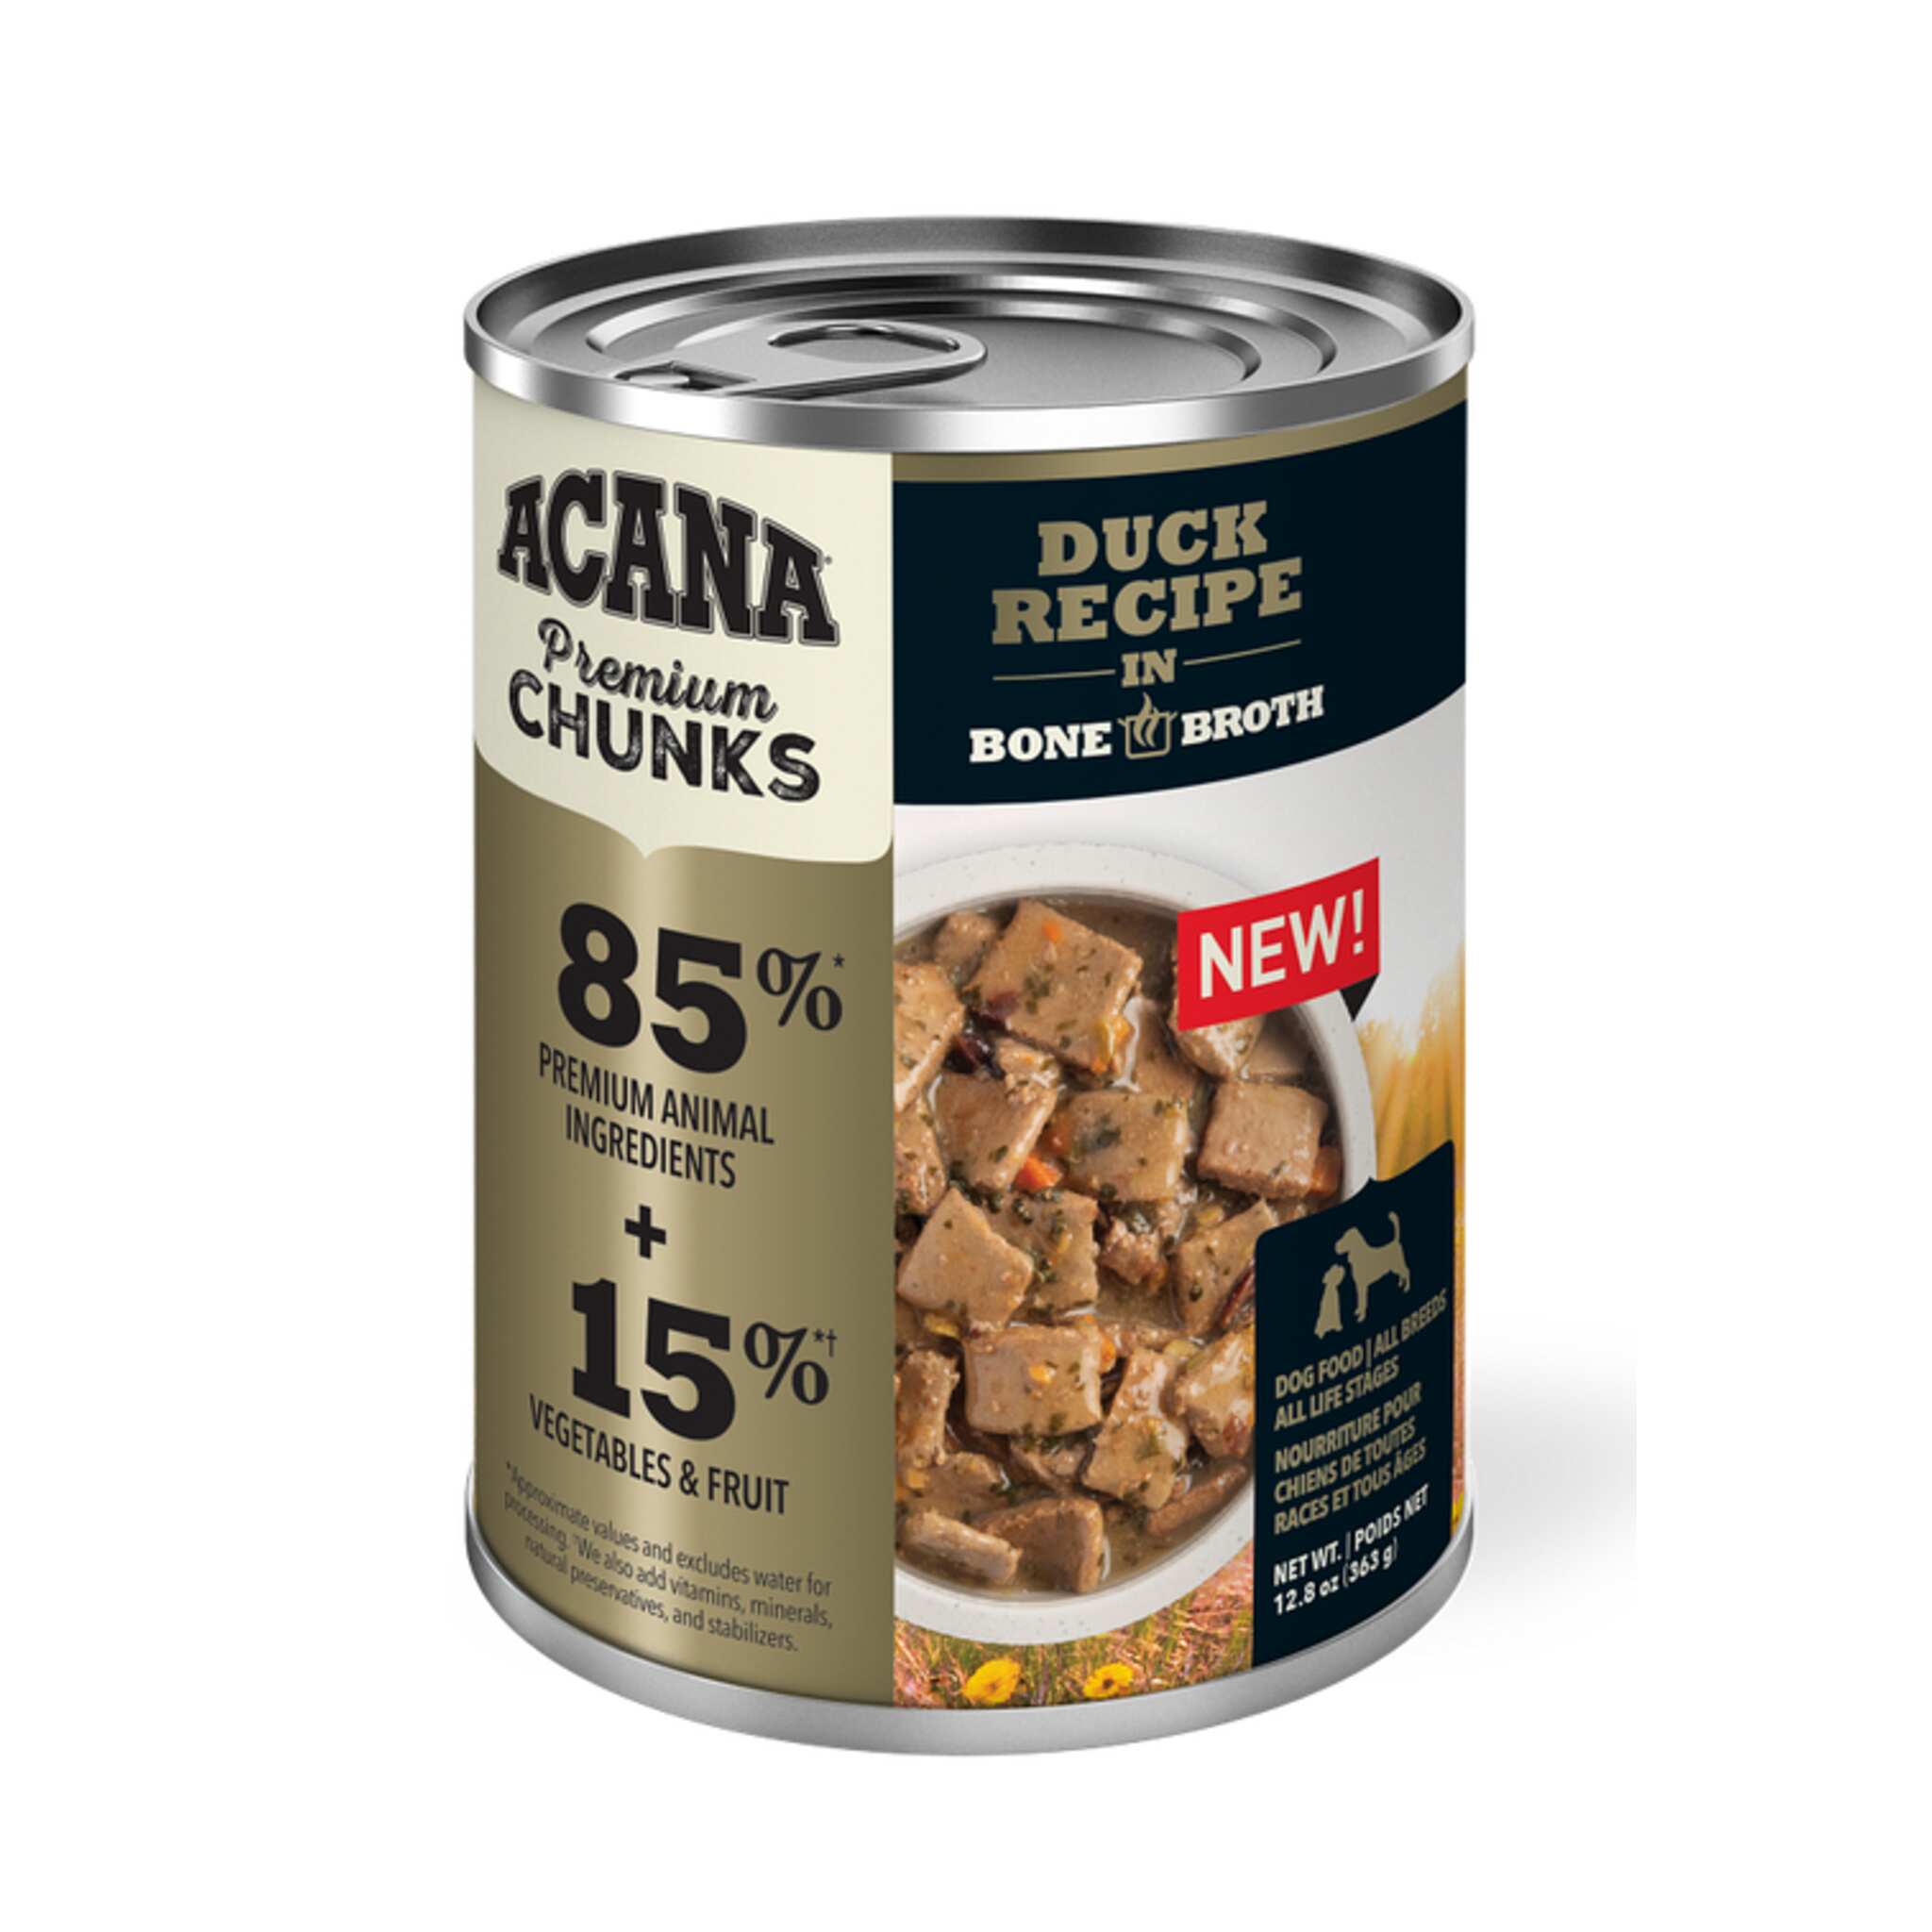 A can of Acana wet dog food, Duck recipe, 12.8 oz.